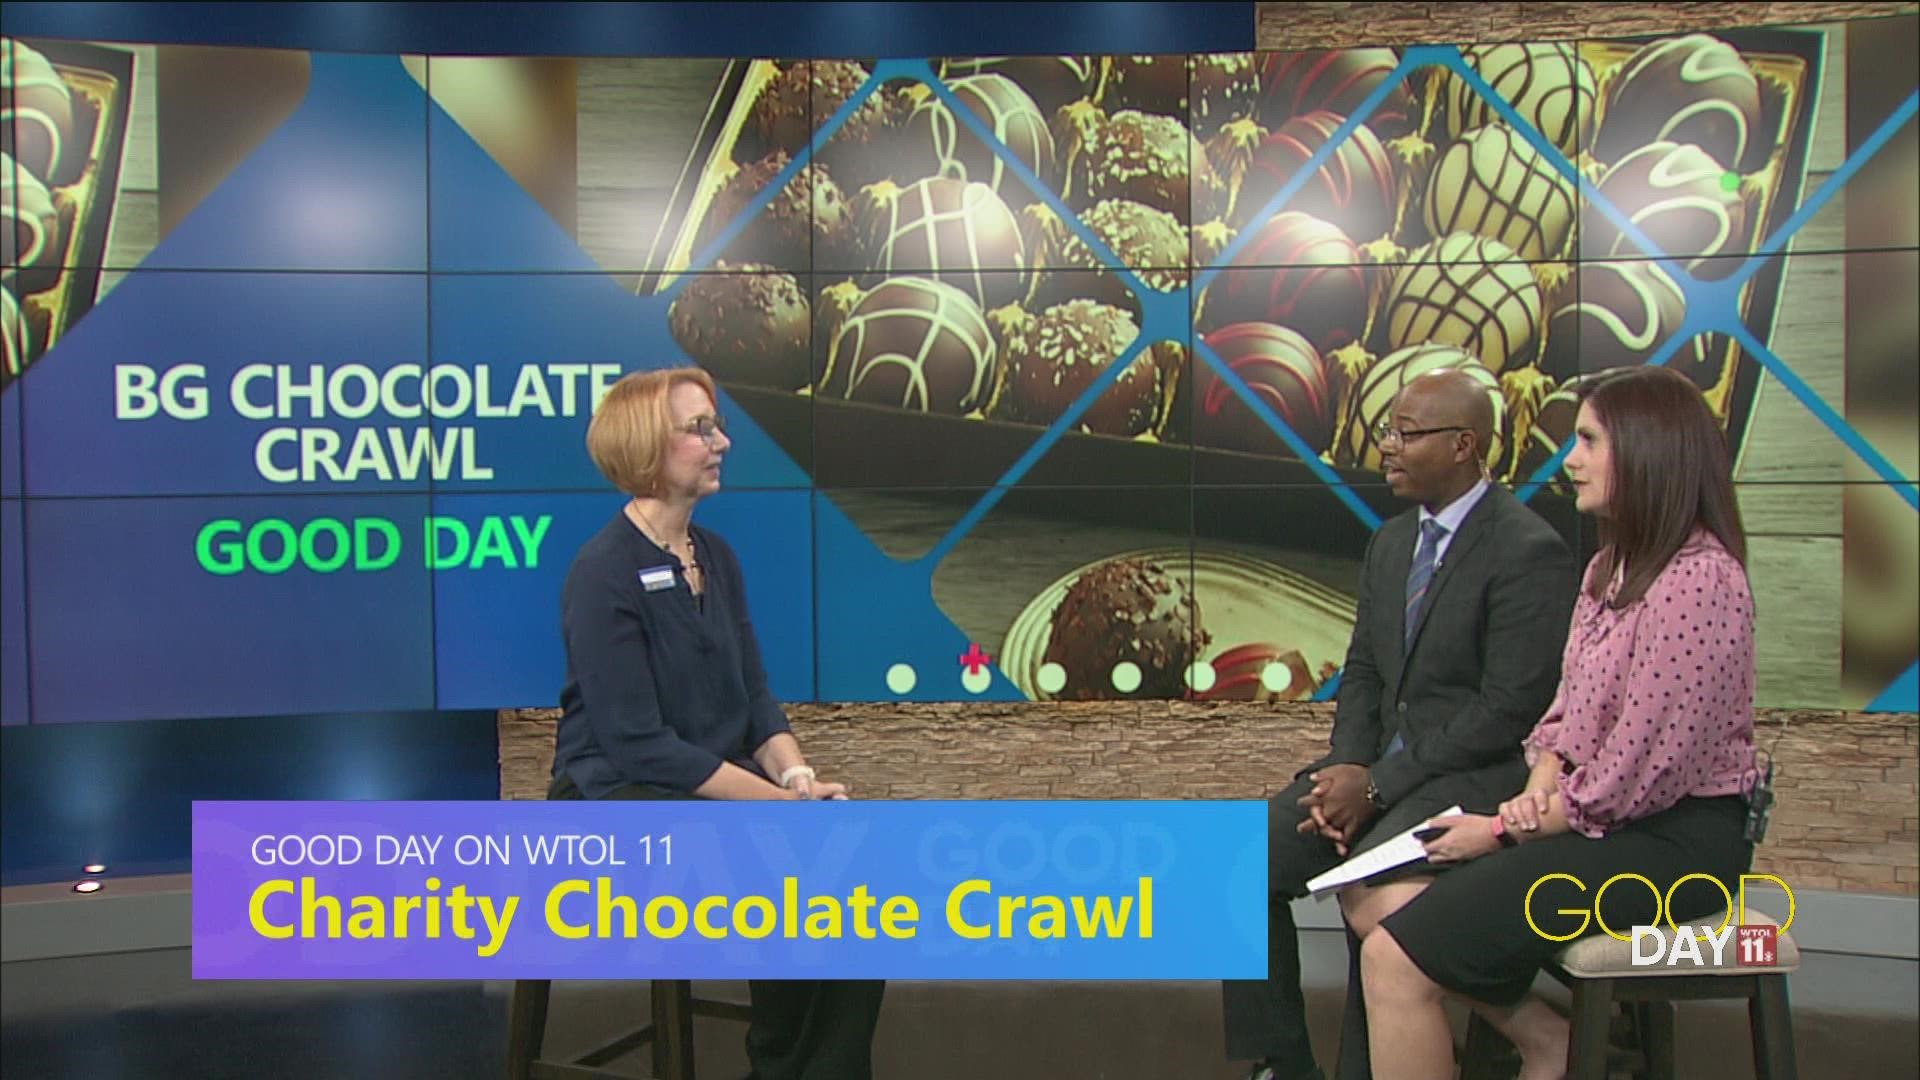 Tickets are on sale now for the annual Charity Chocolate Crawl in Bowling Green benefitting United Way in Wood County. Here's more on the #SweetestDayEver!